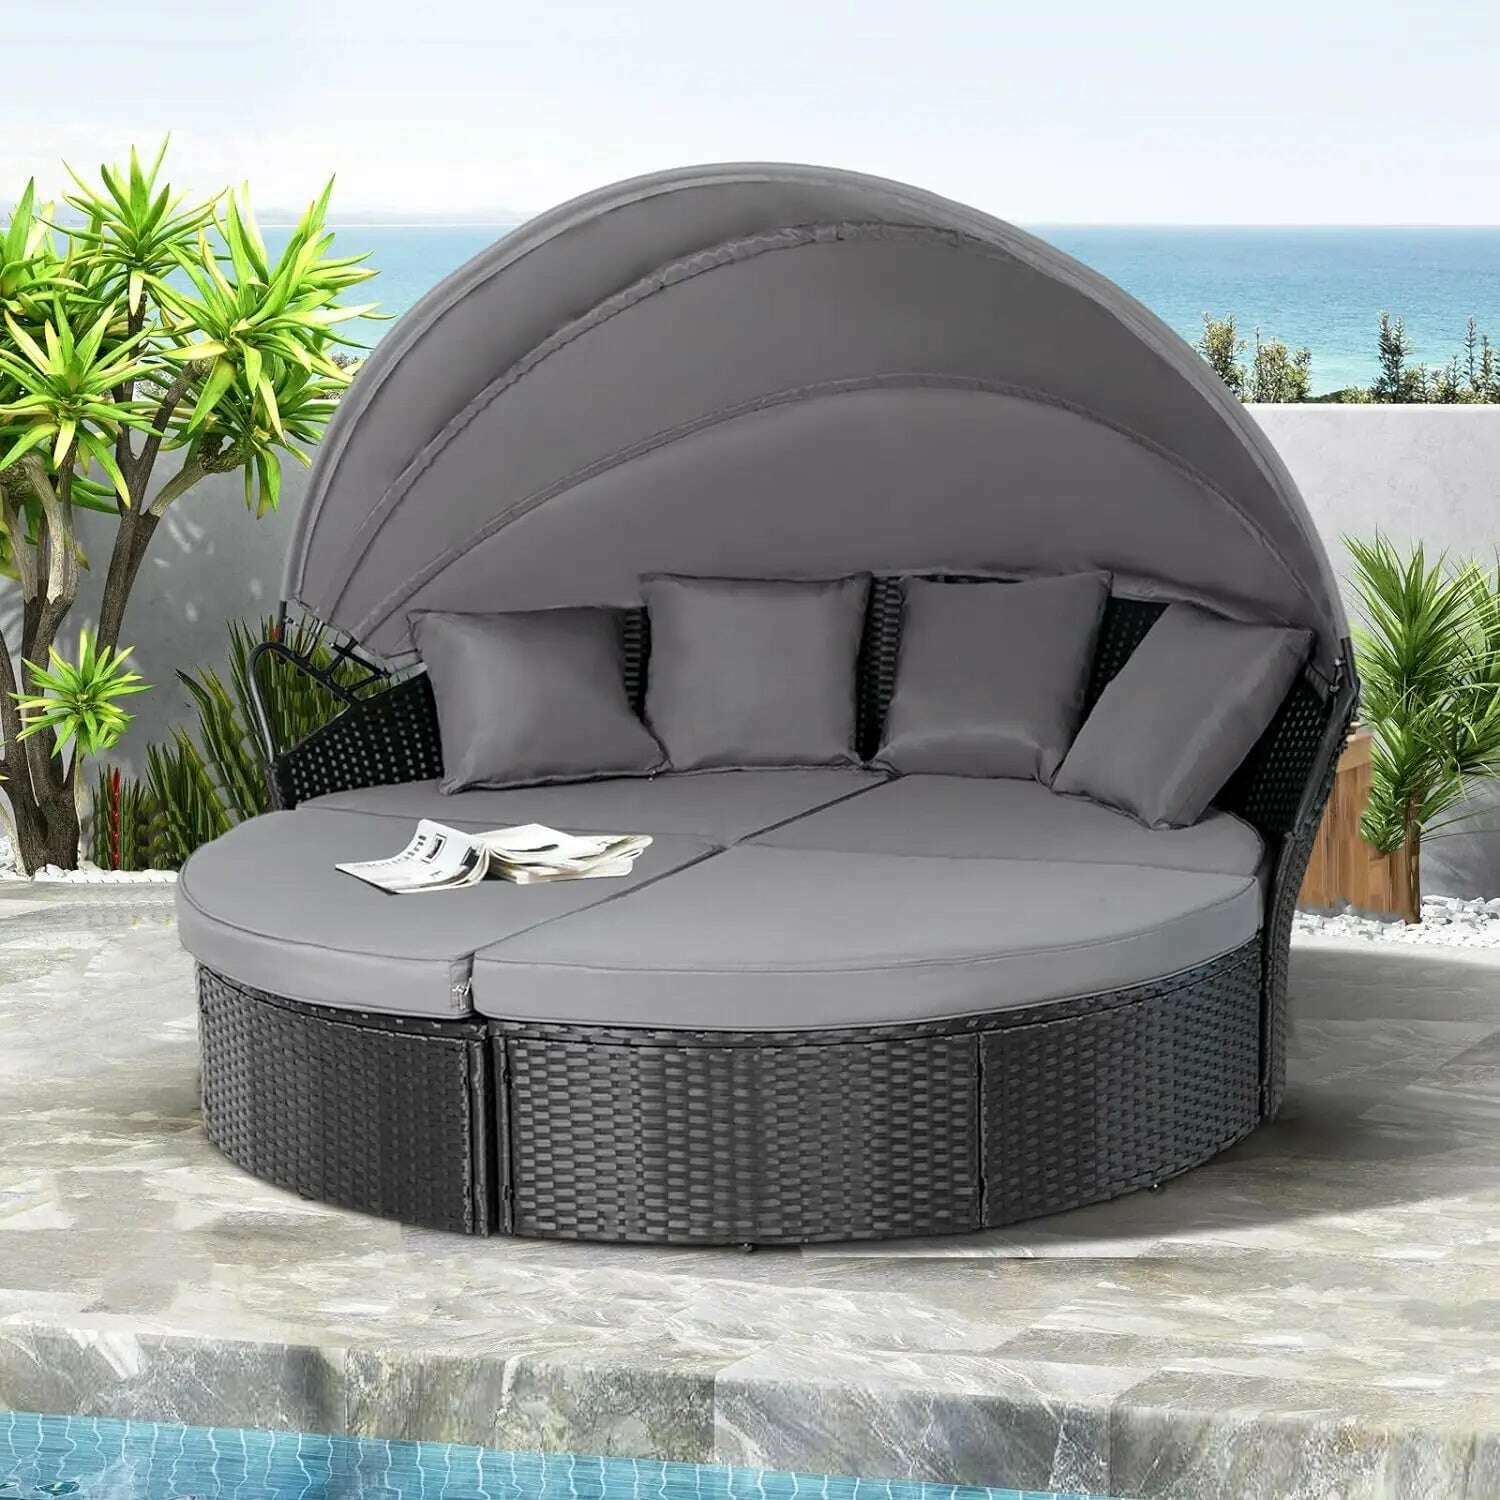 KIMLUD, Outdoor Terrace Canopy Bed with Washable Soft Cushion, Clamshell Shaped Segmented Seats, Suitable for Backyard, Porch, (brown), Black / United States / Round Daybed, KIMLUD Womens Clothes